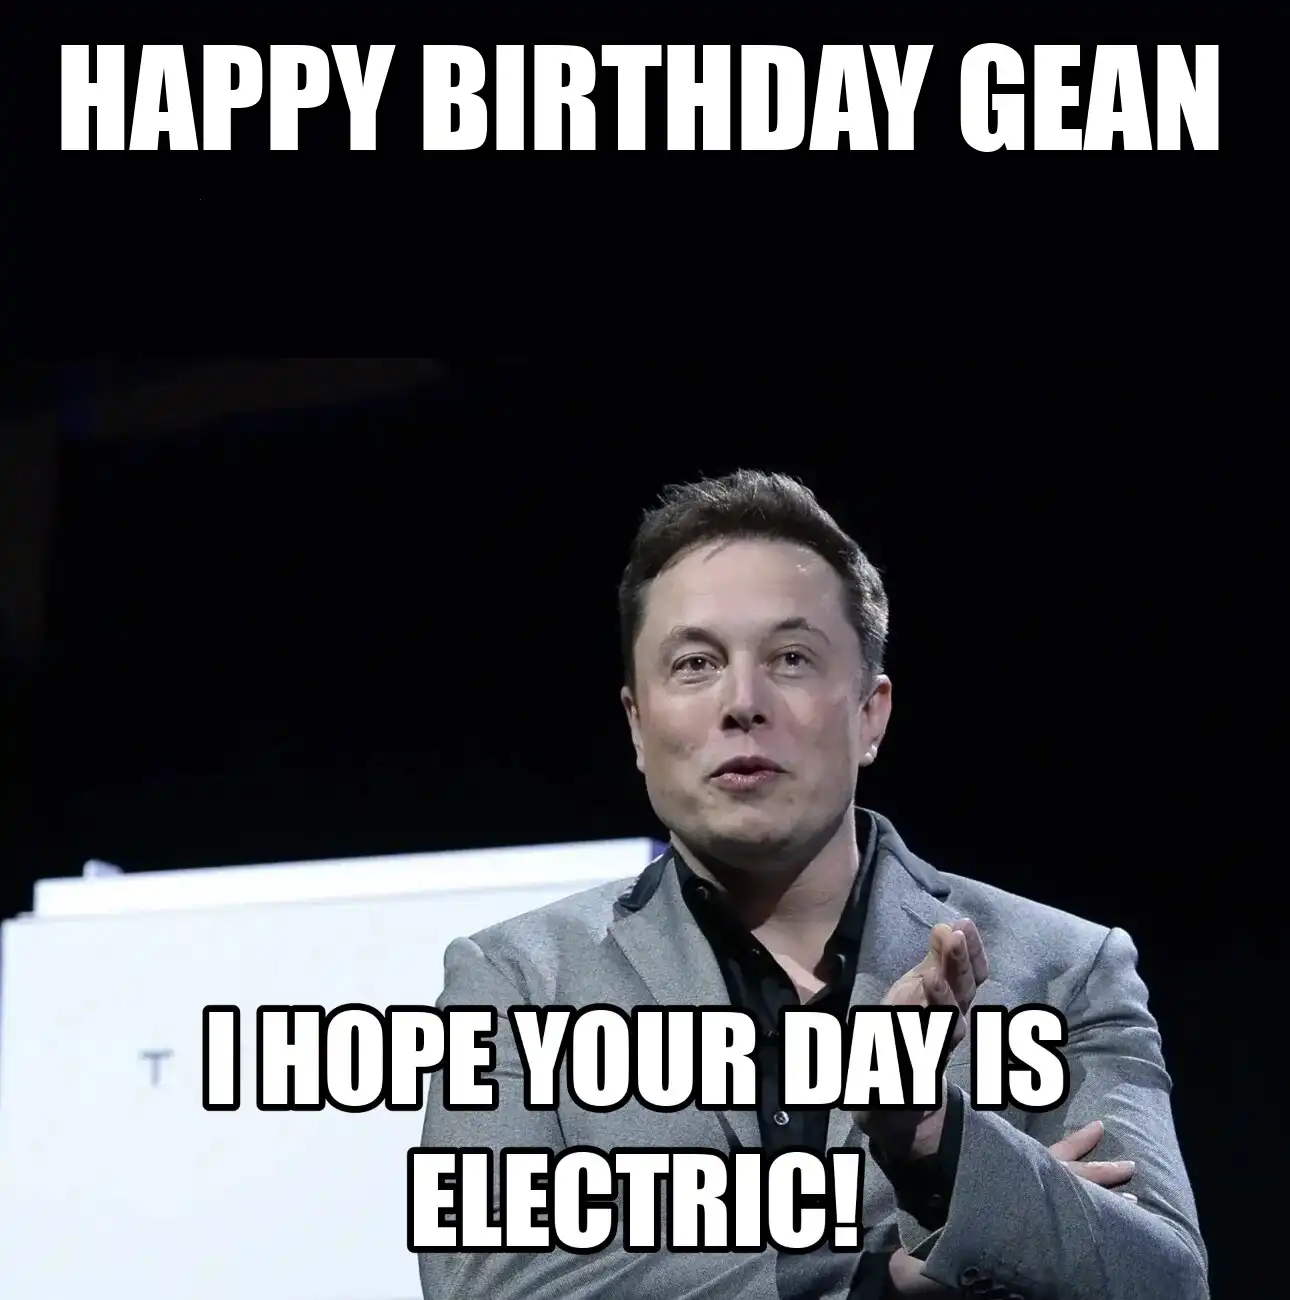 Happy Birthday Gean I Hope Your Day Is Electric Meme